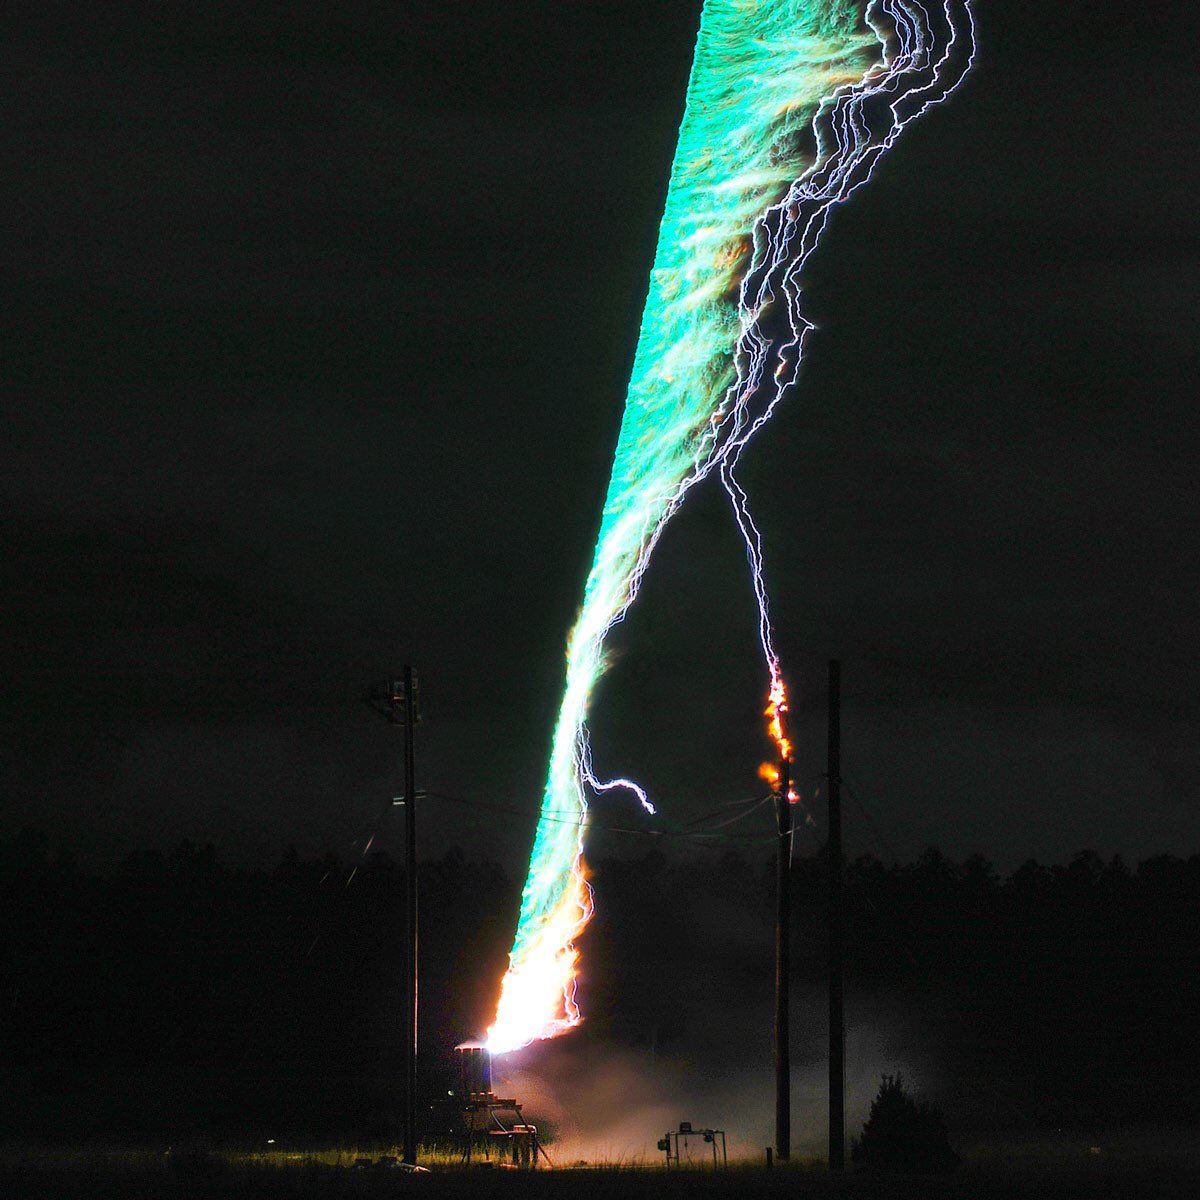 Meanwhile, weather researchers embraced maniacal laughter by developing a new experimental technique.By launching rockets trailing wire behind them, scientists amped up conductivity to study rocket-triggered lightning. Its gorgeous-terrifying.More:  https://www.wired.com/2015/06/the-lightning-machine/